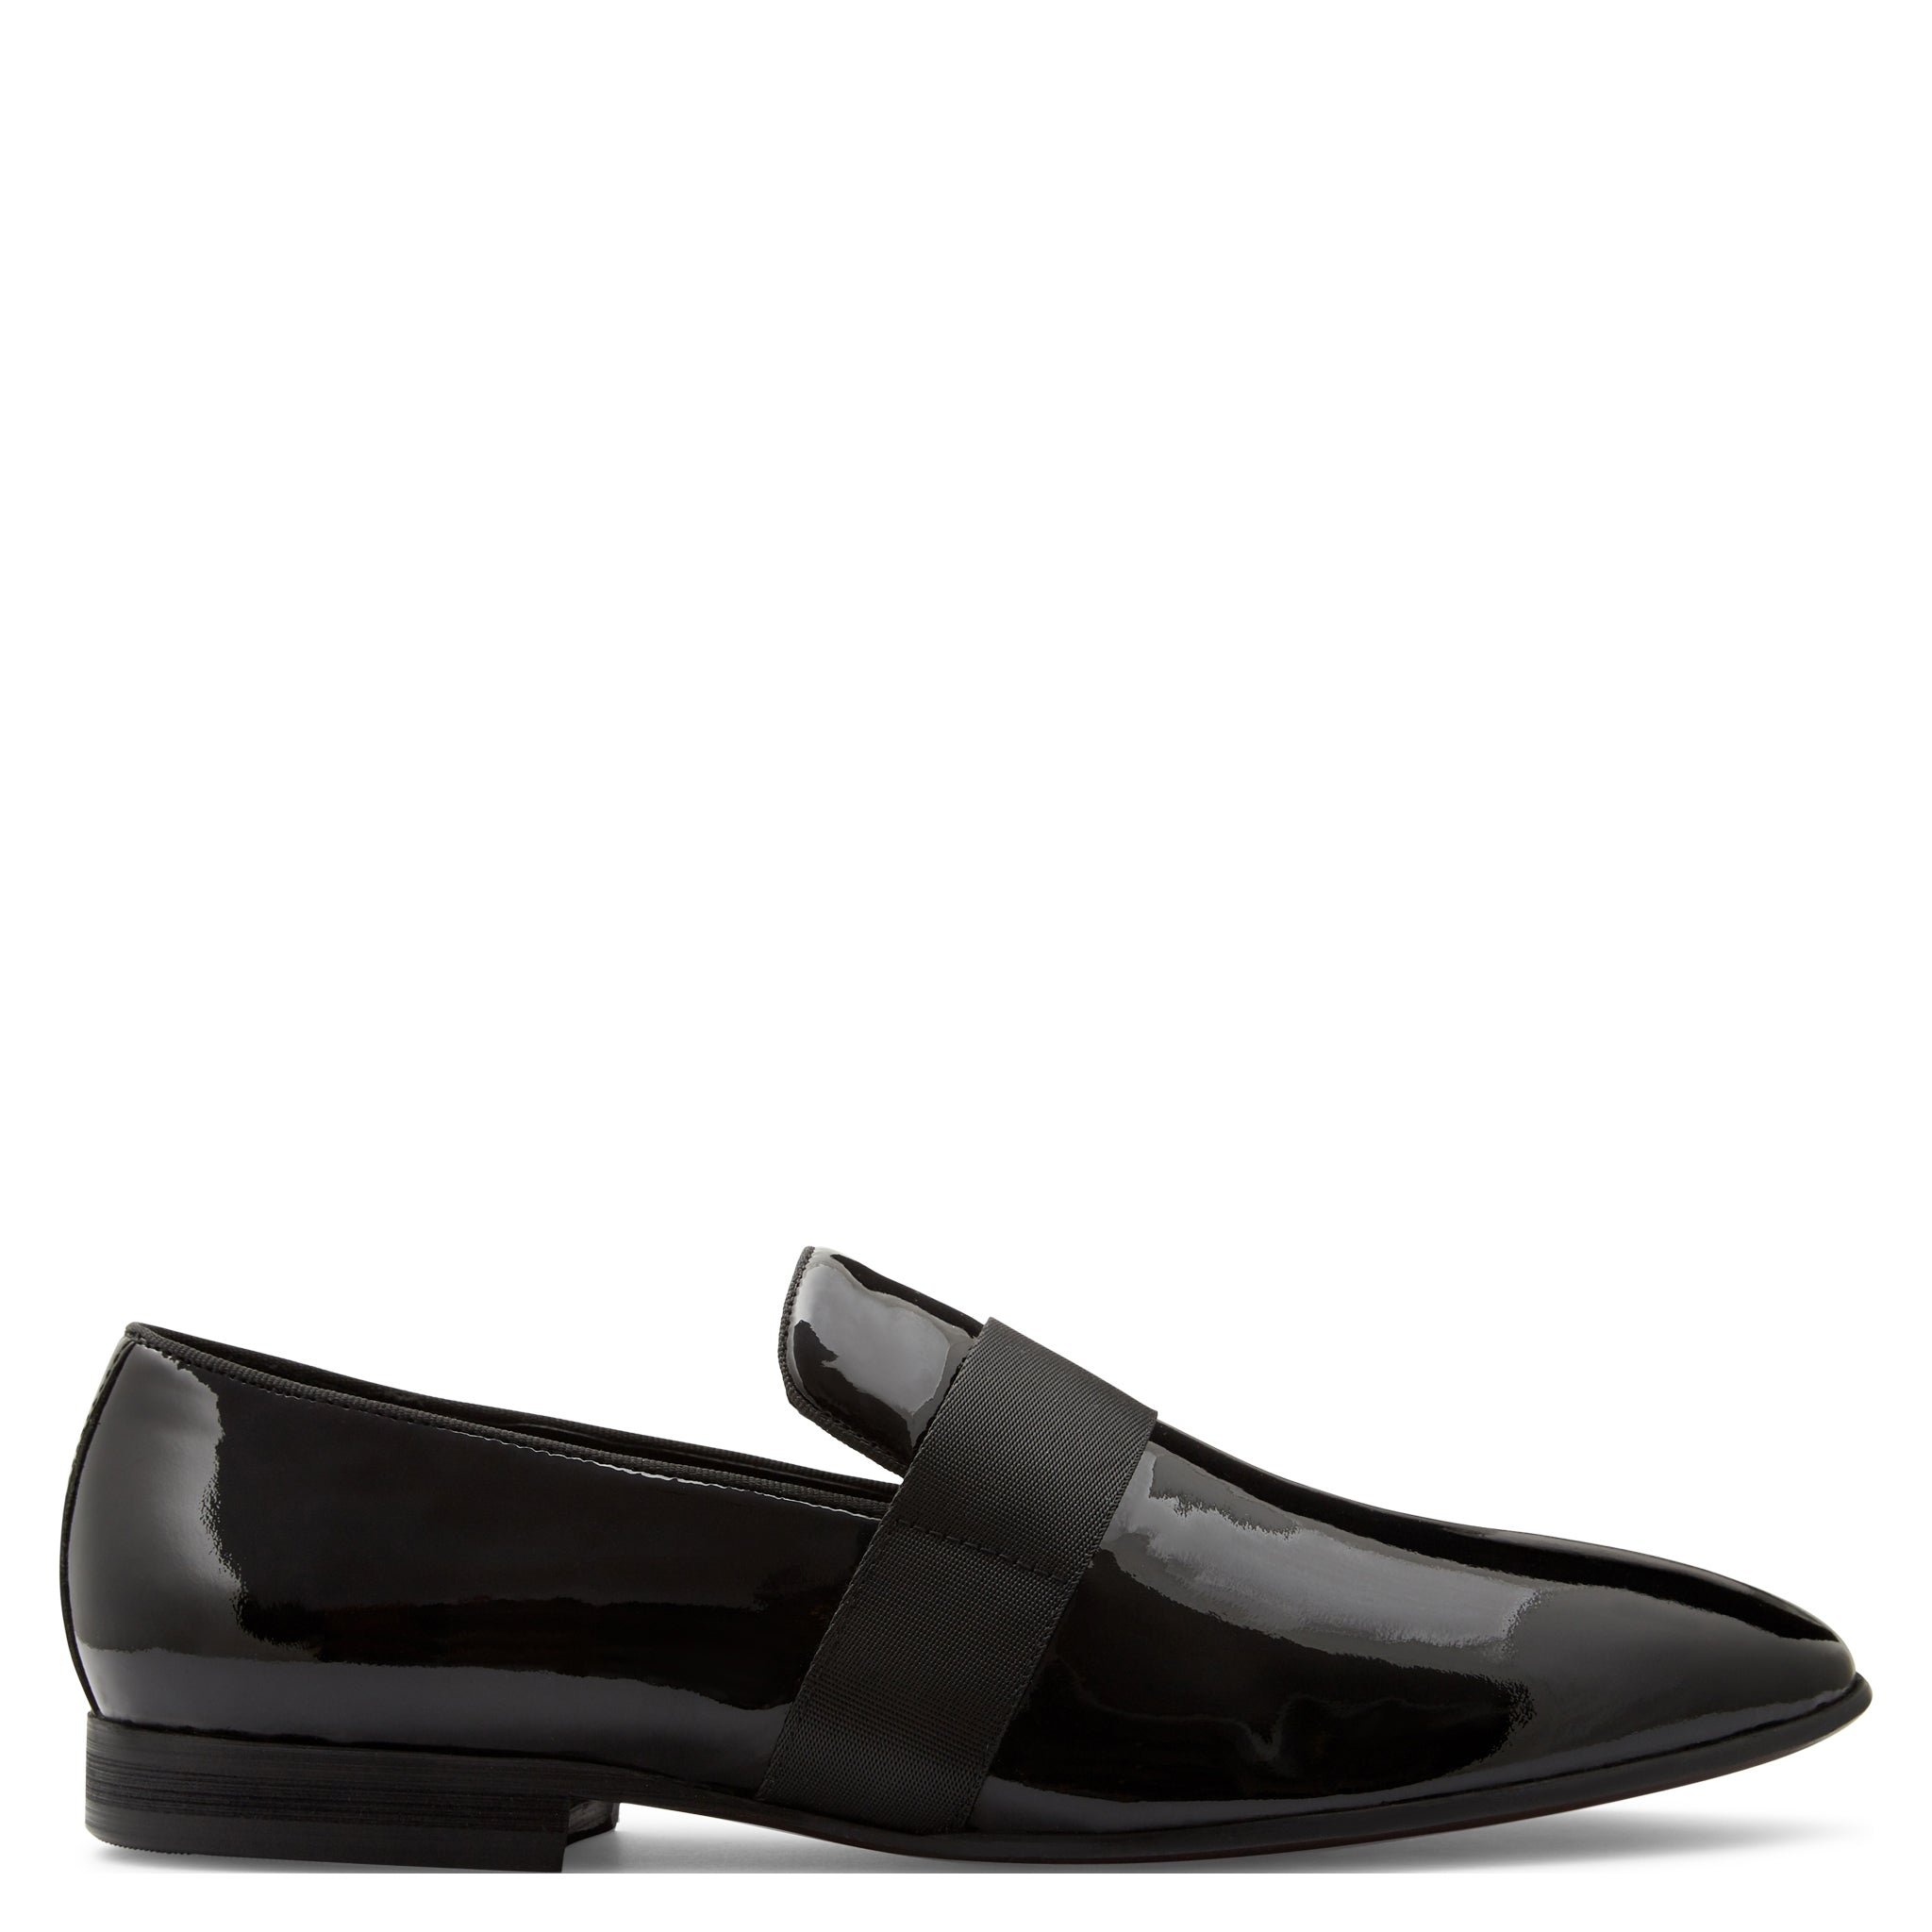 patent slip on shoes